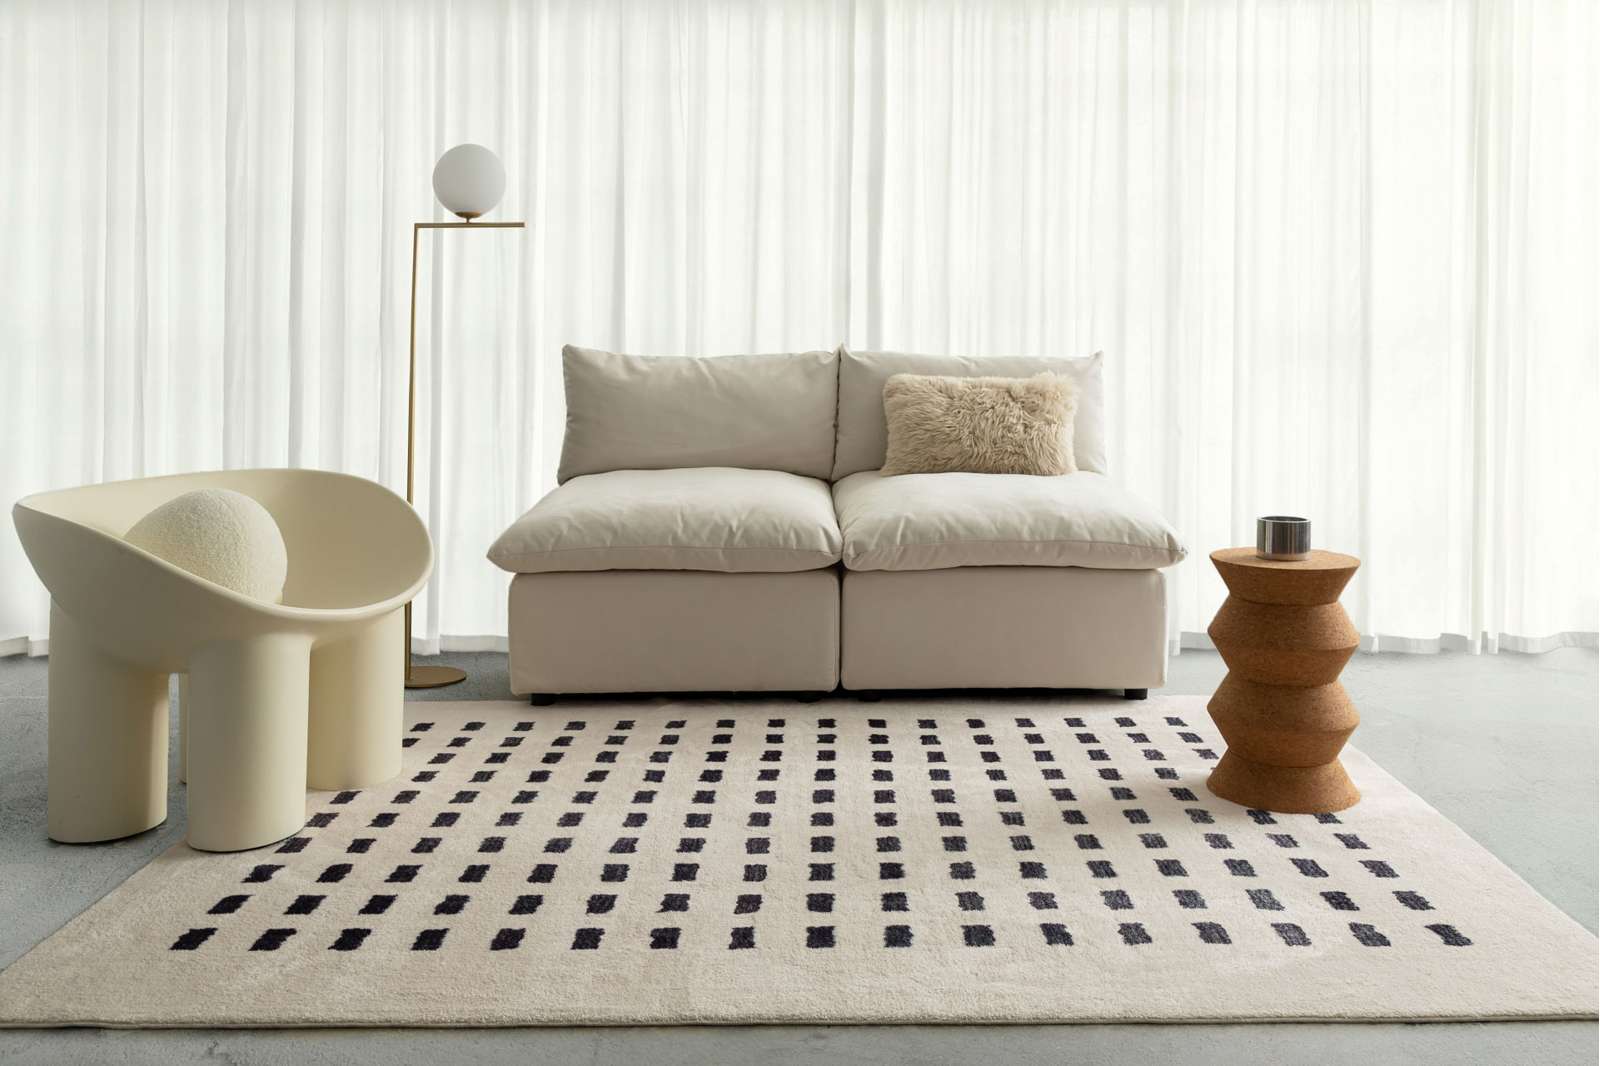 Loopsie RUGS Taber Cream and Black Rectangles Washable Rug